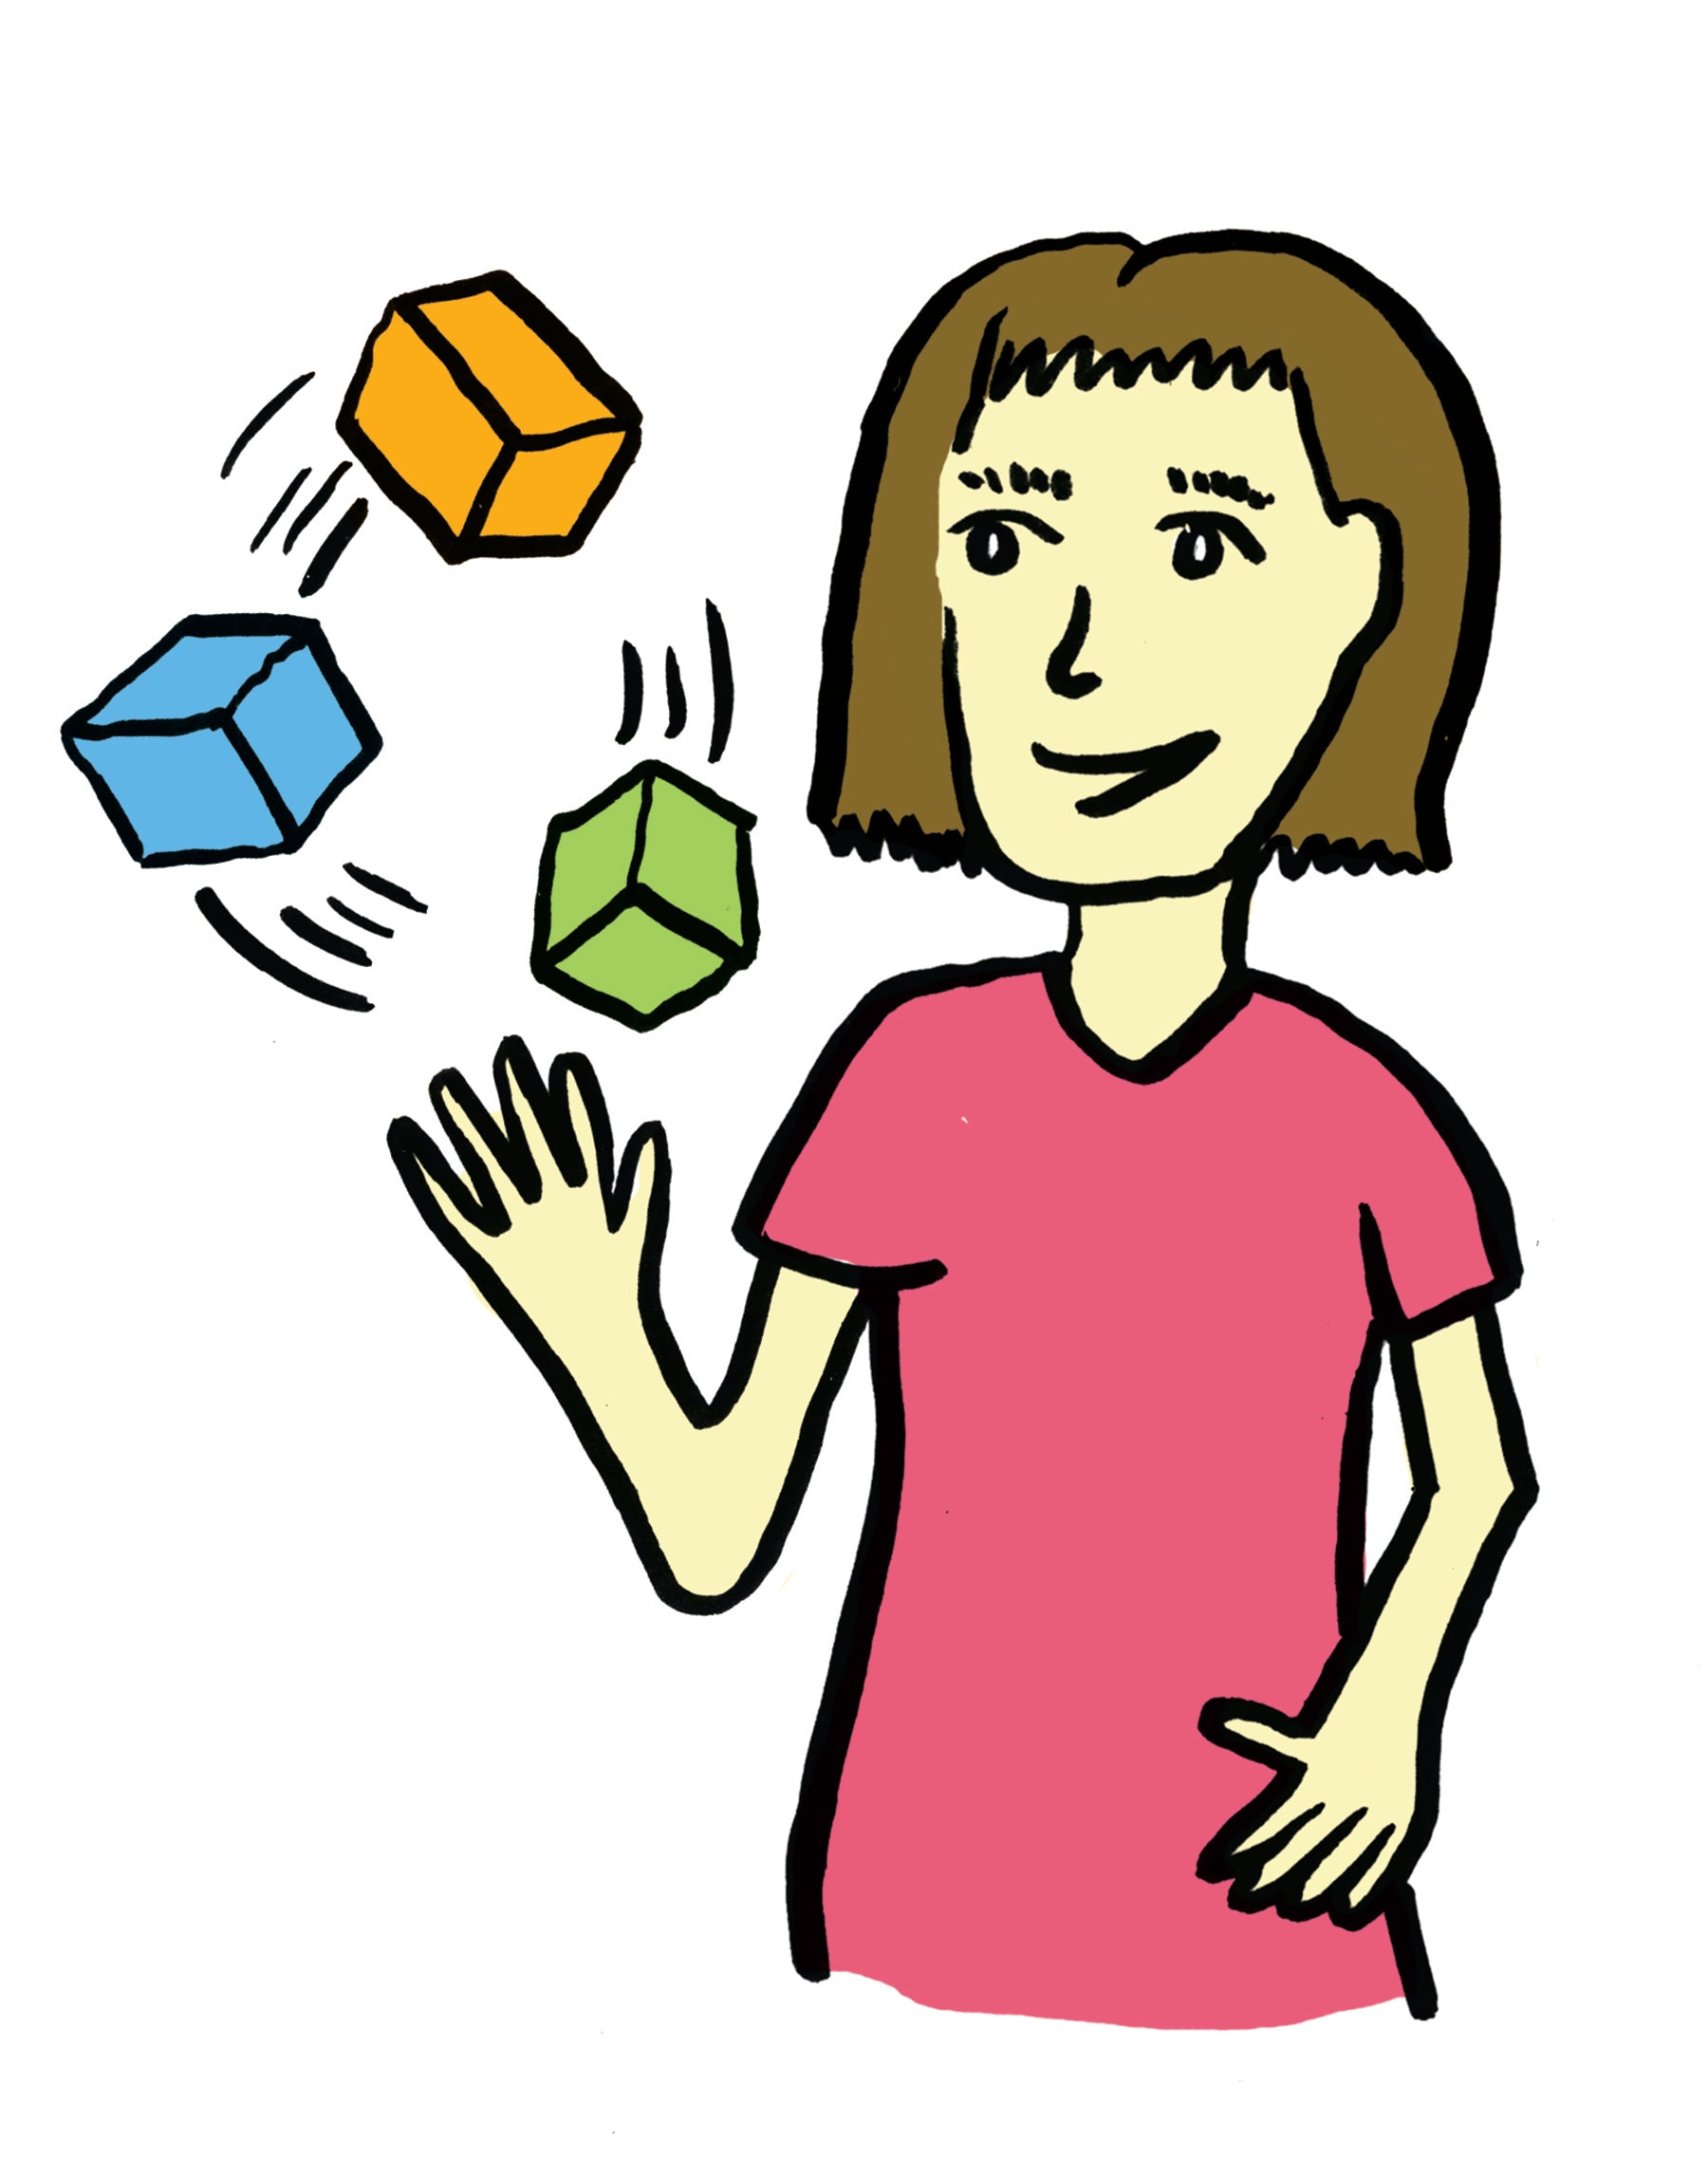 Illustration of a young woman juggling cubes with one hand as a metaphor as getting started. 